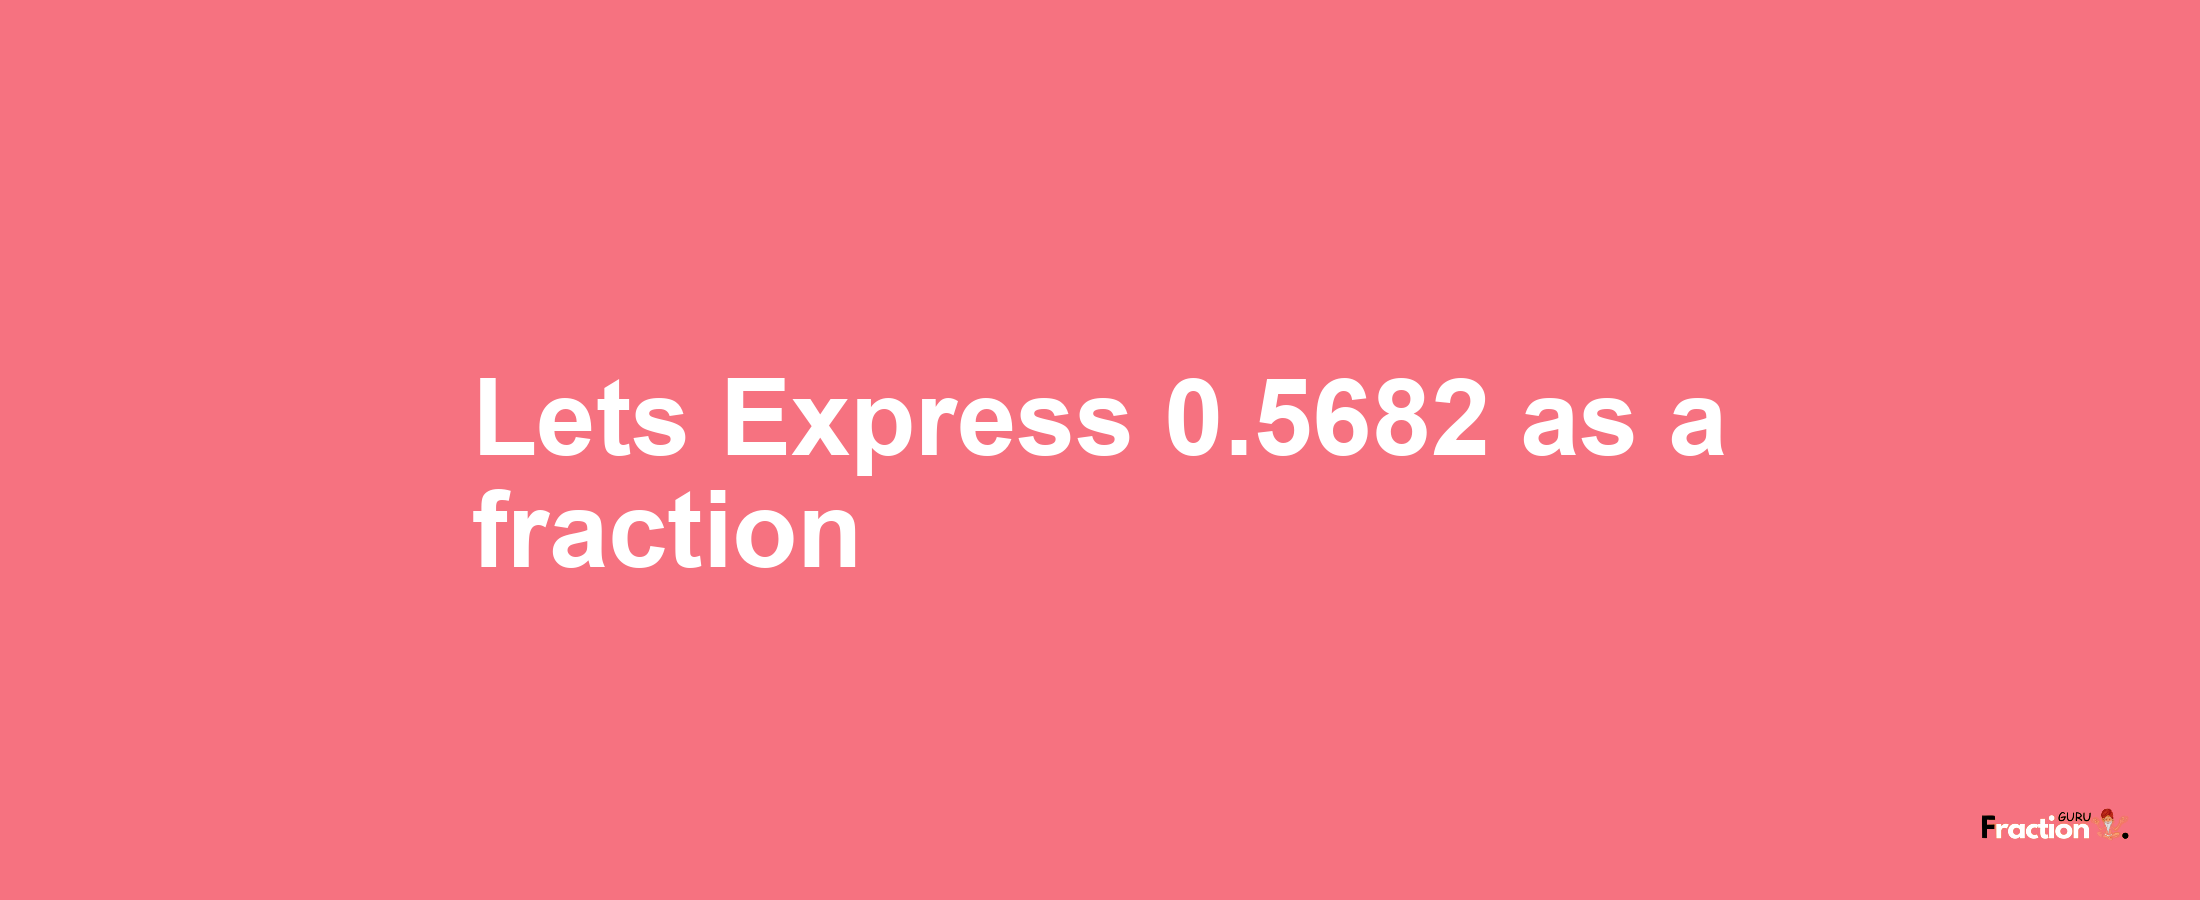 Lets Express 0.5682 as afraction